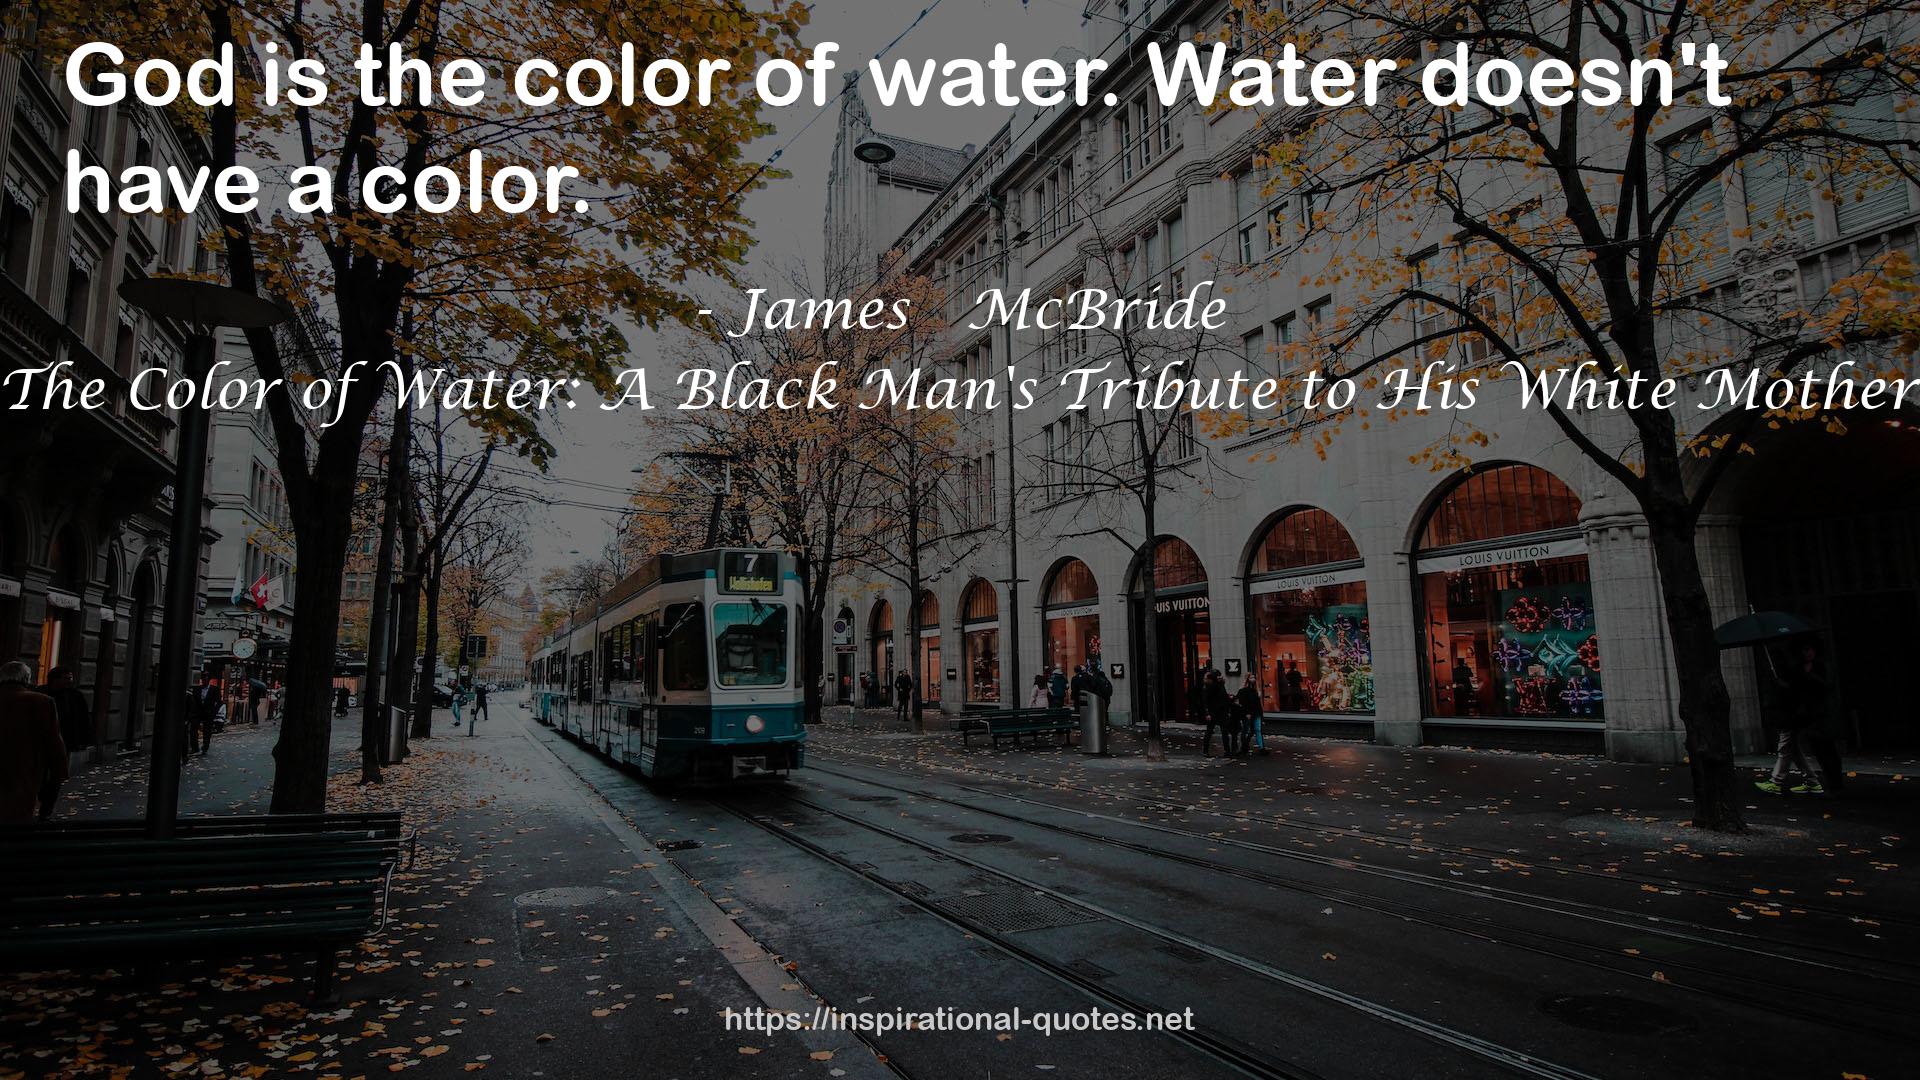 The Color of Water: A Black Man's Tribute to His White Mother QUOTES